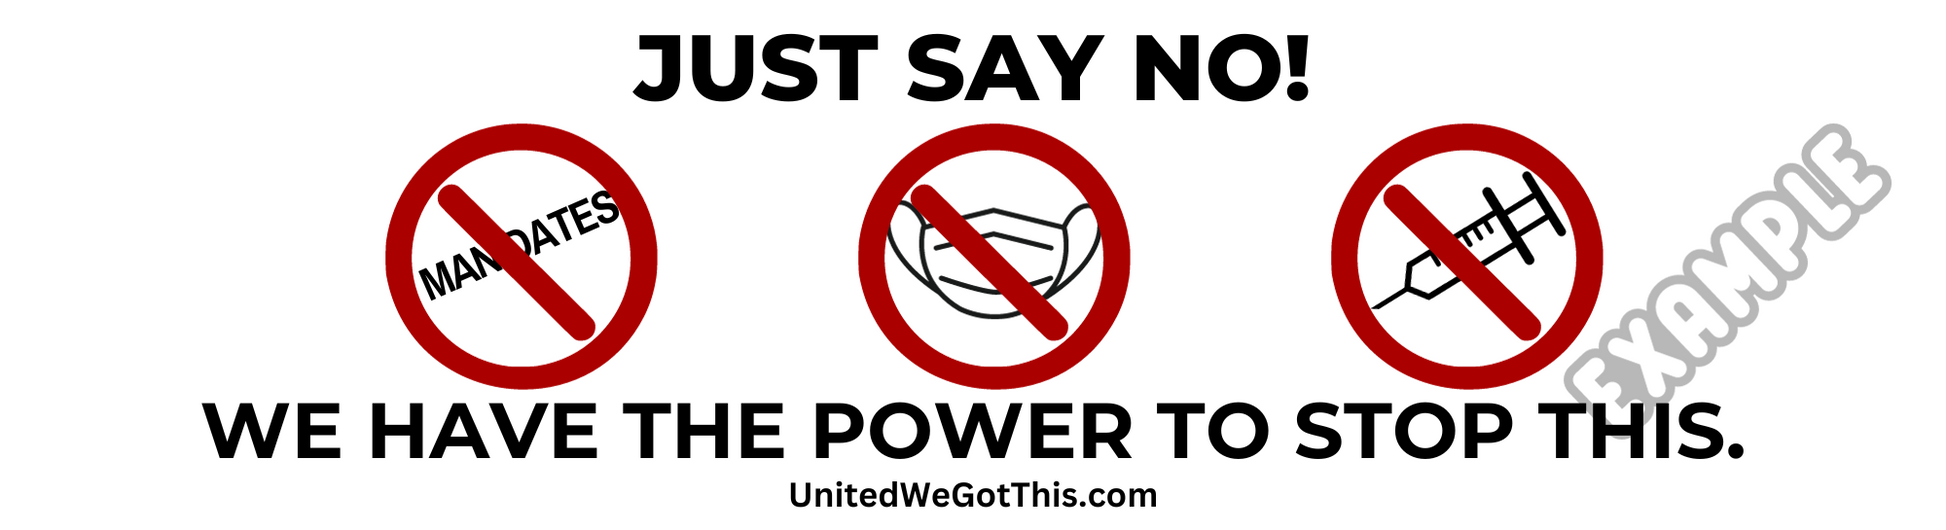 Just Say No Bumper Sticker 11 x 3, Package of 20 – United We Got This